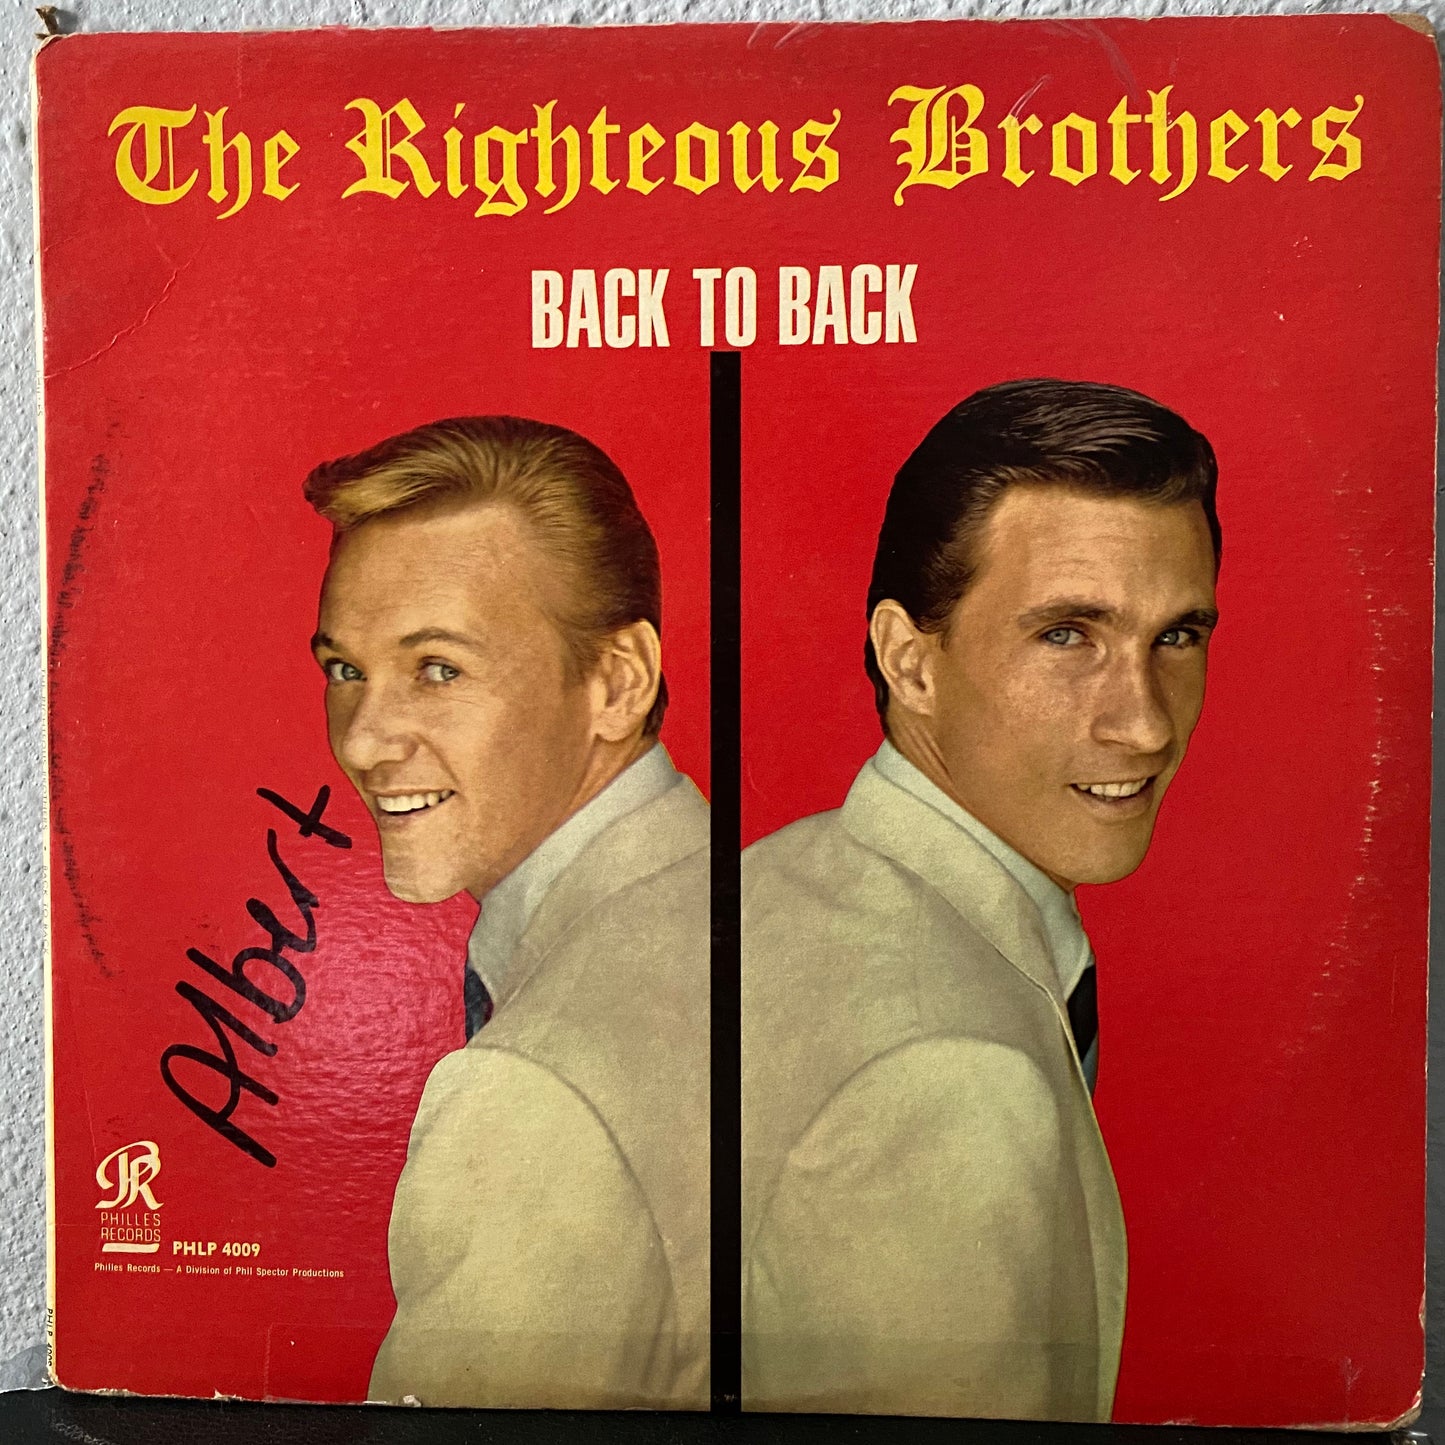 The Righteous Brothers - Back to Back (Vinyl)